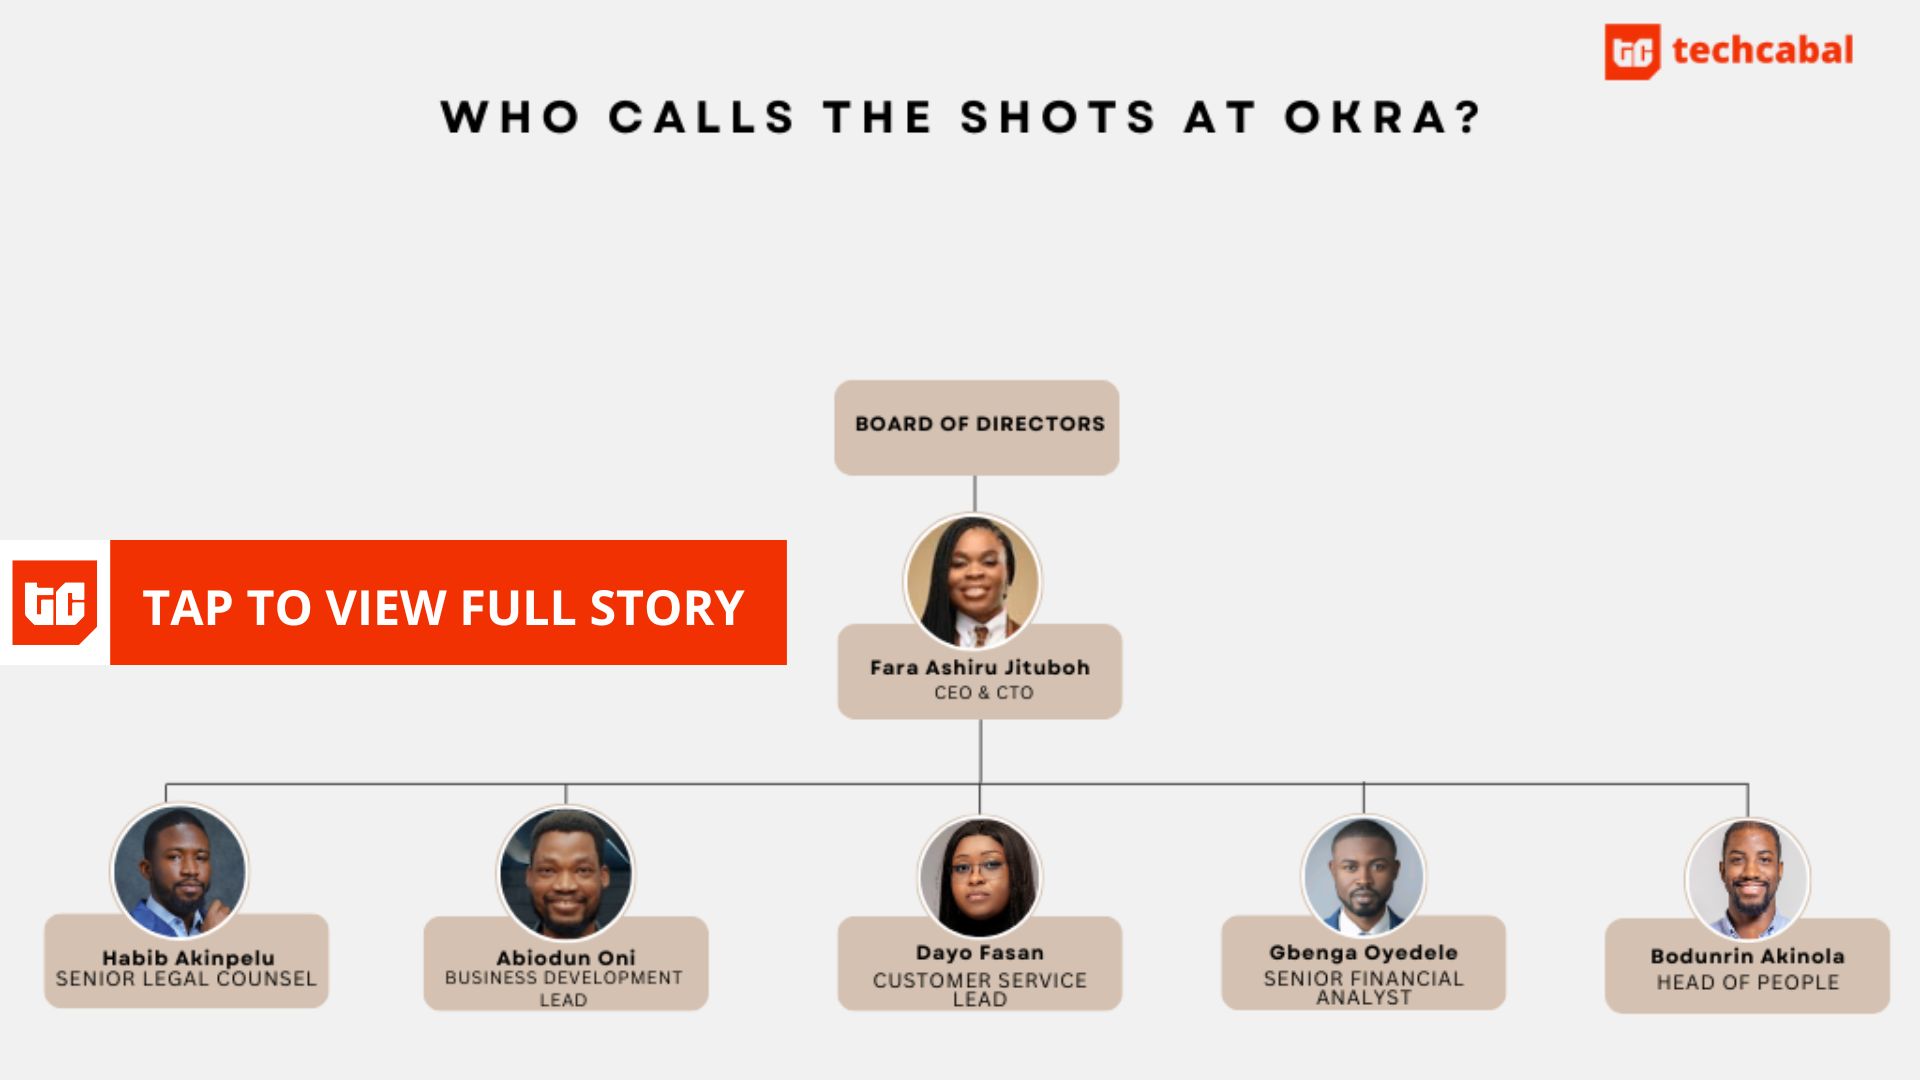 Who calls the photographs at Susa Ventures-backed Okra?